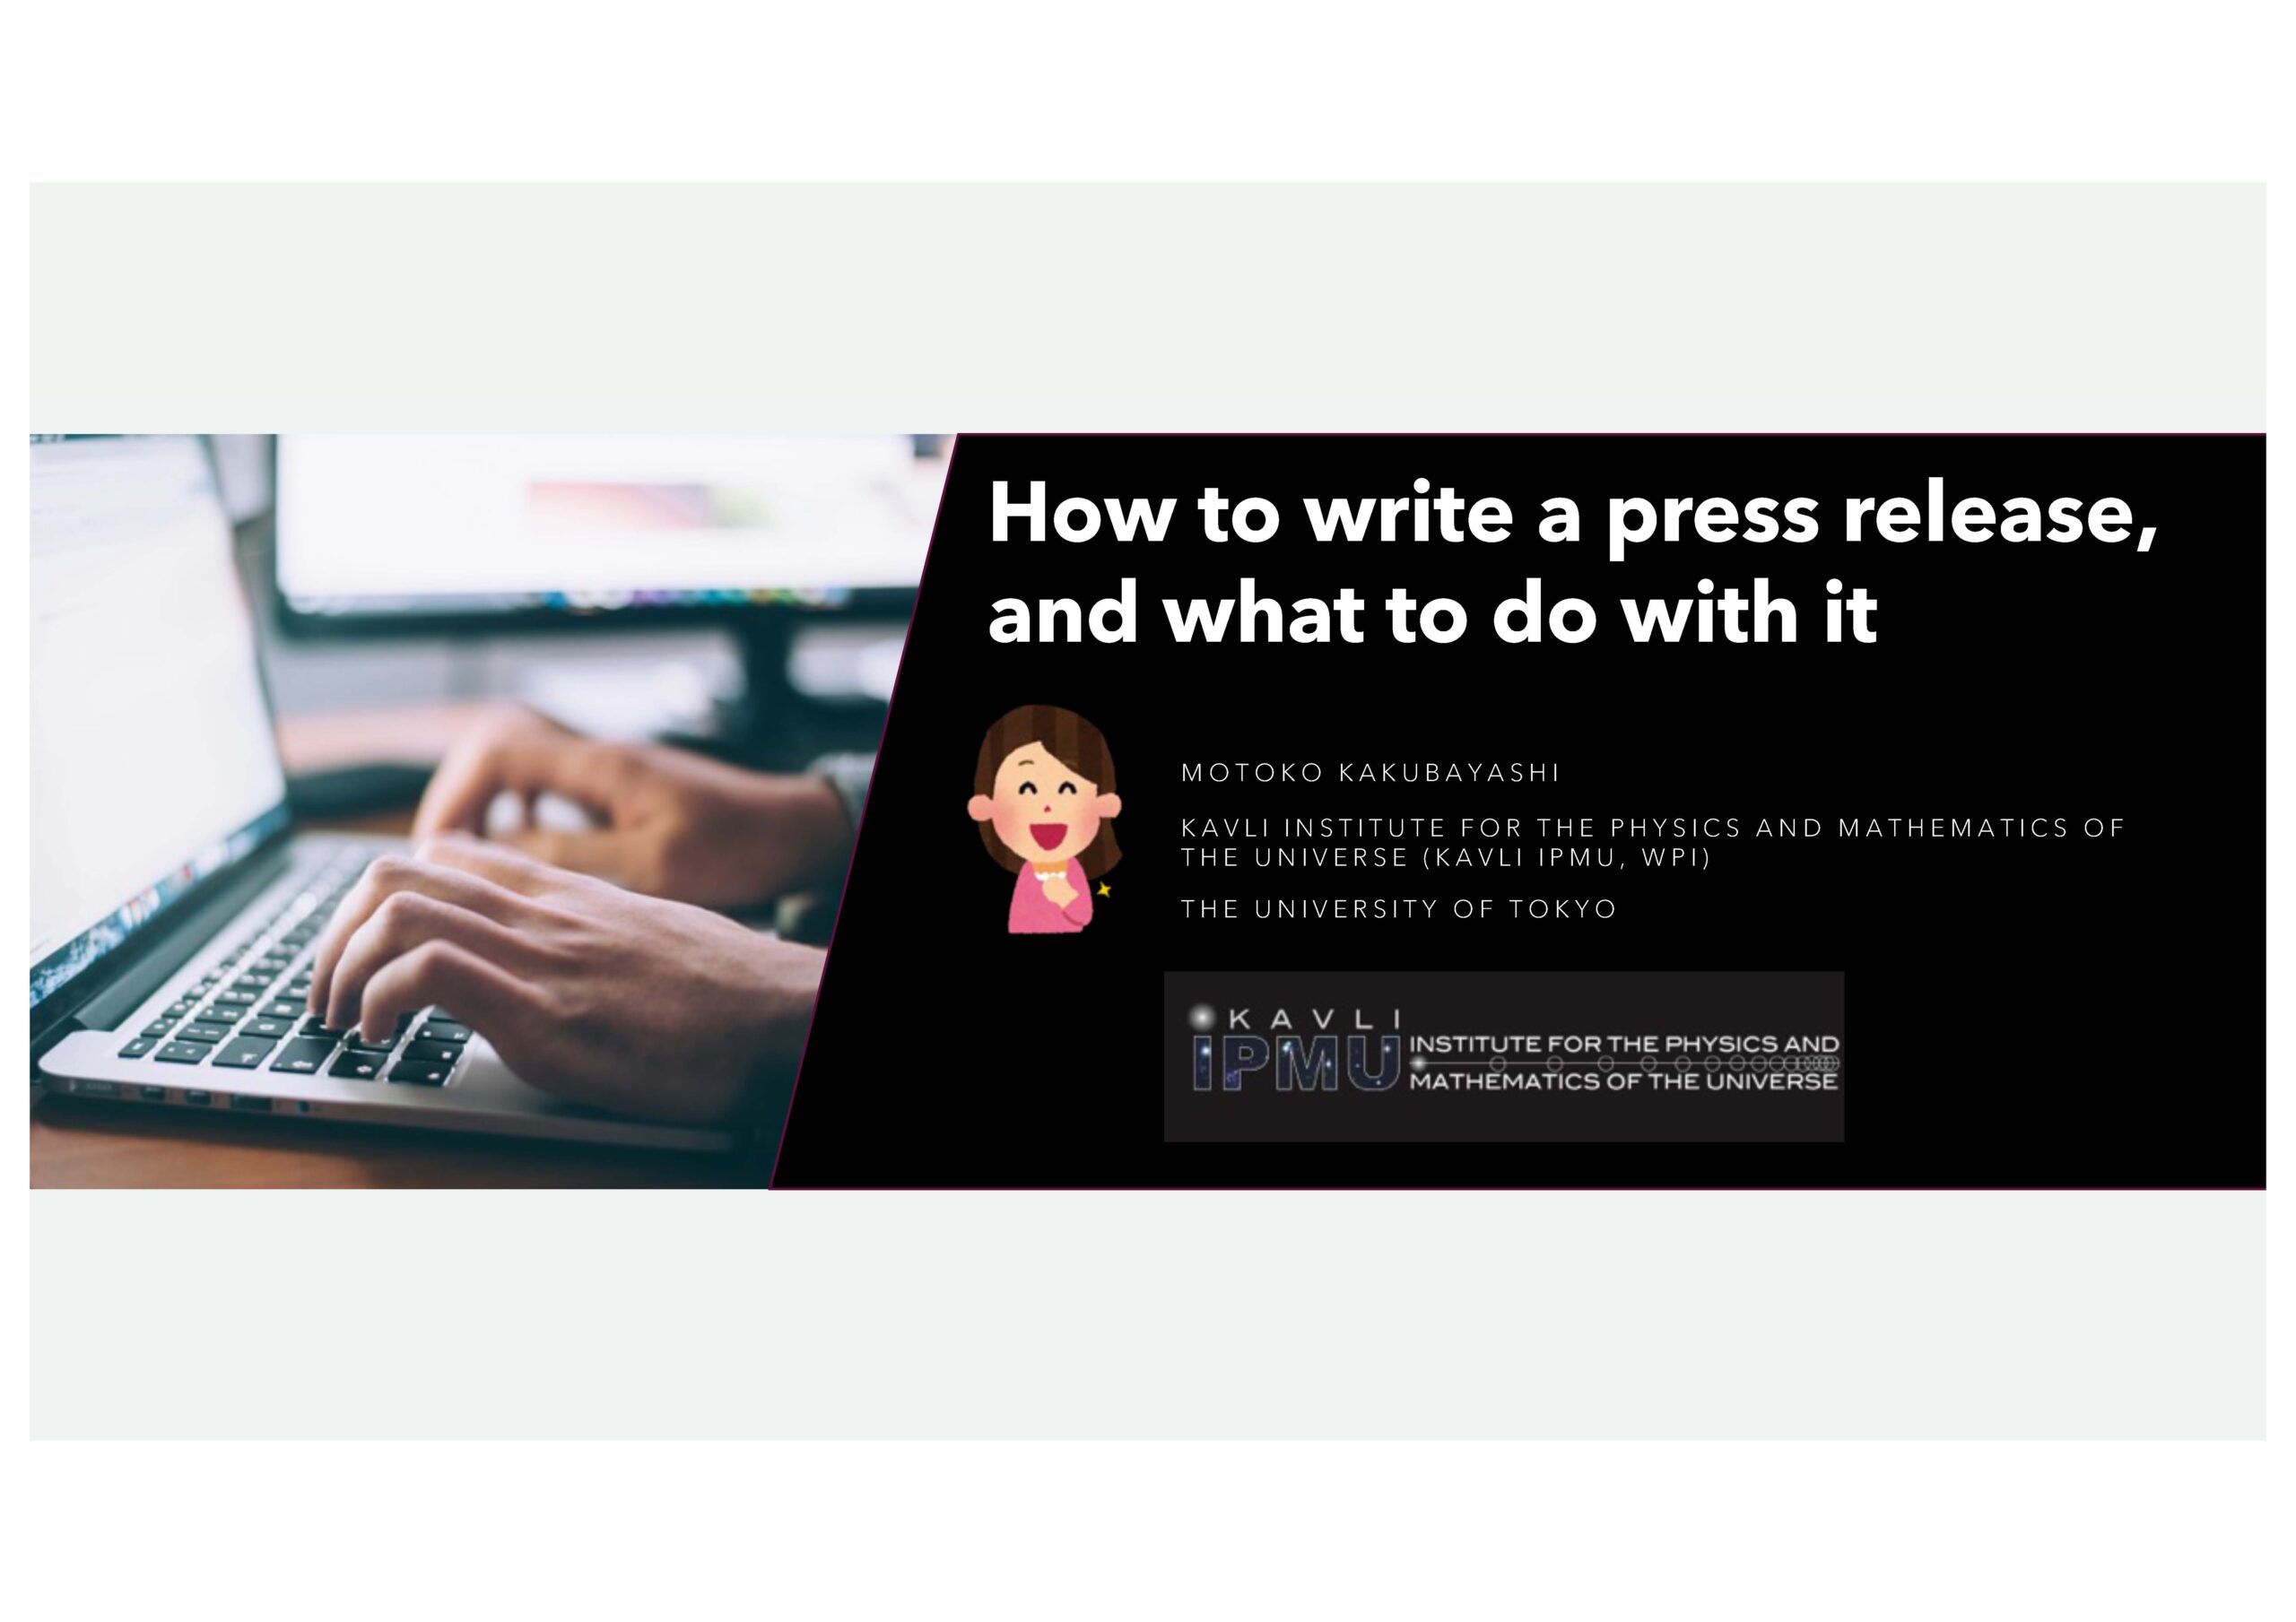 Slides by M. Kakubayashi (Kavli-IPMU, WPI, The University of Tokyo): How to write a press release, and what to do with it